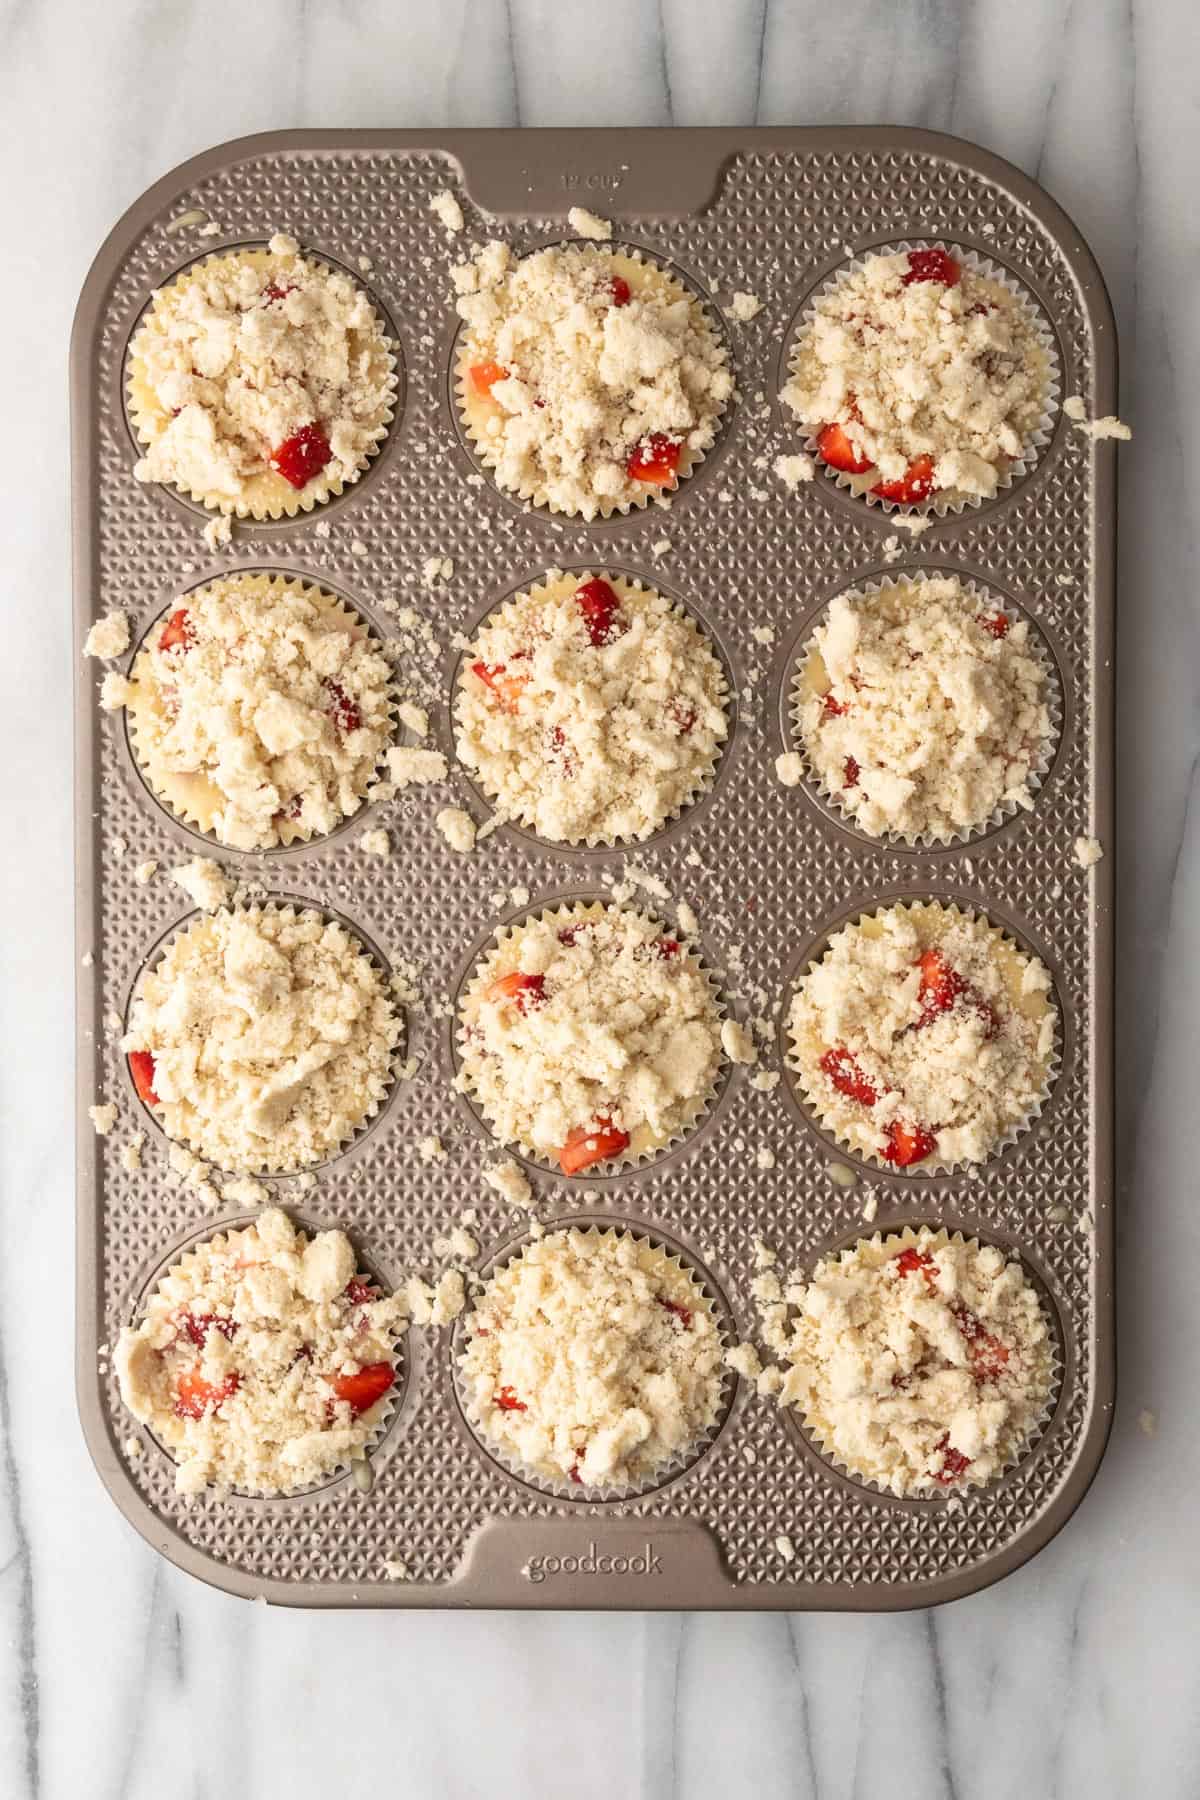 A muffin tin filled with unbaked strawberry muffin batter topped with crumble topping.